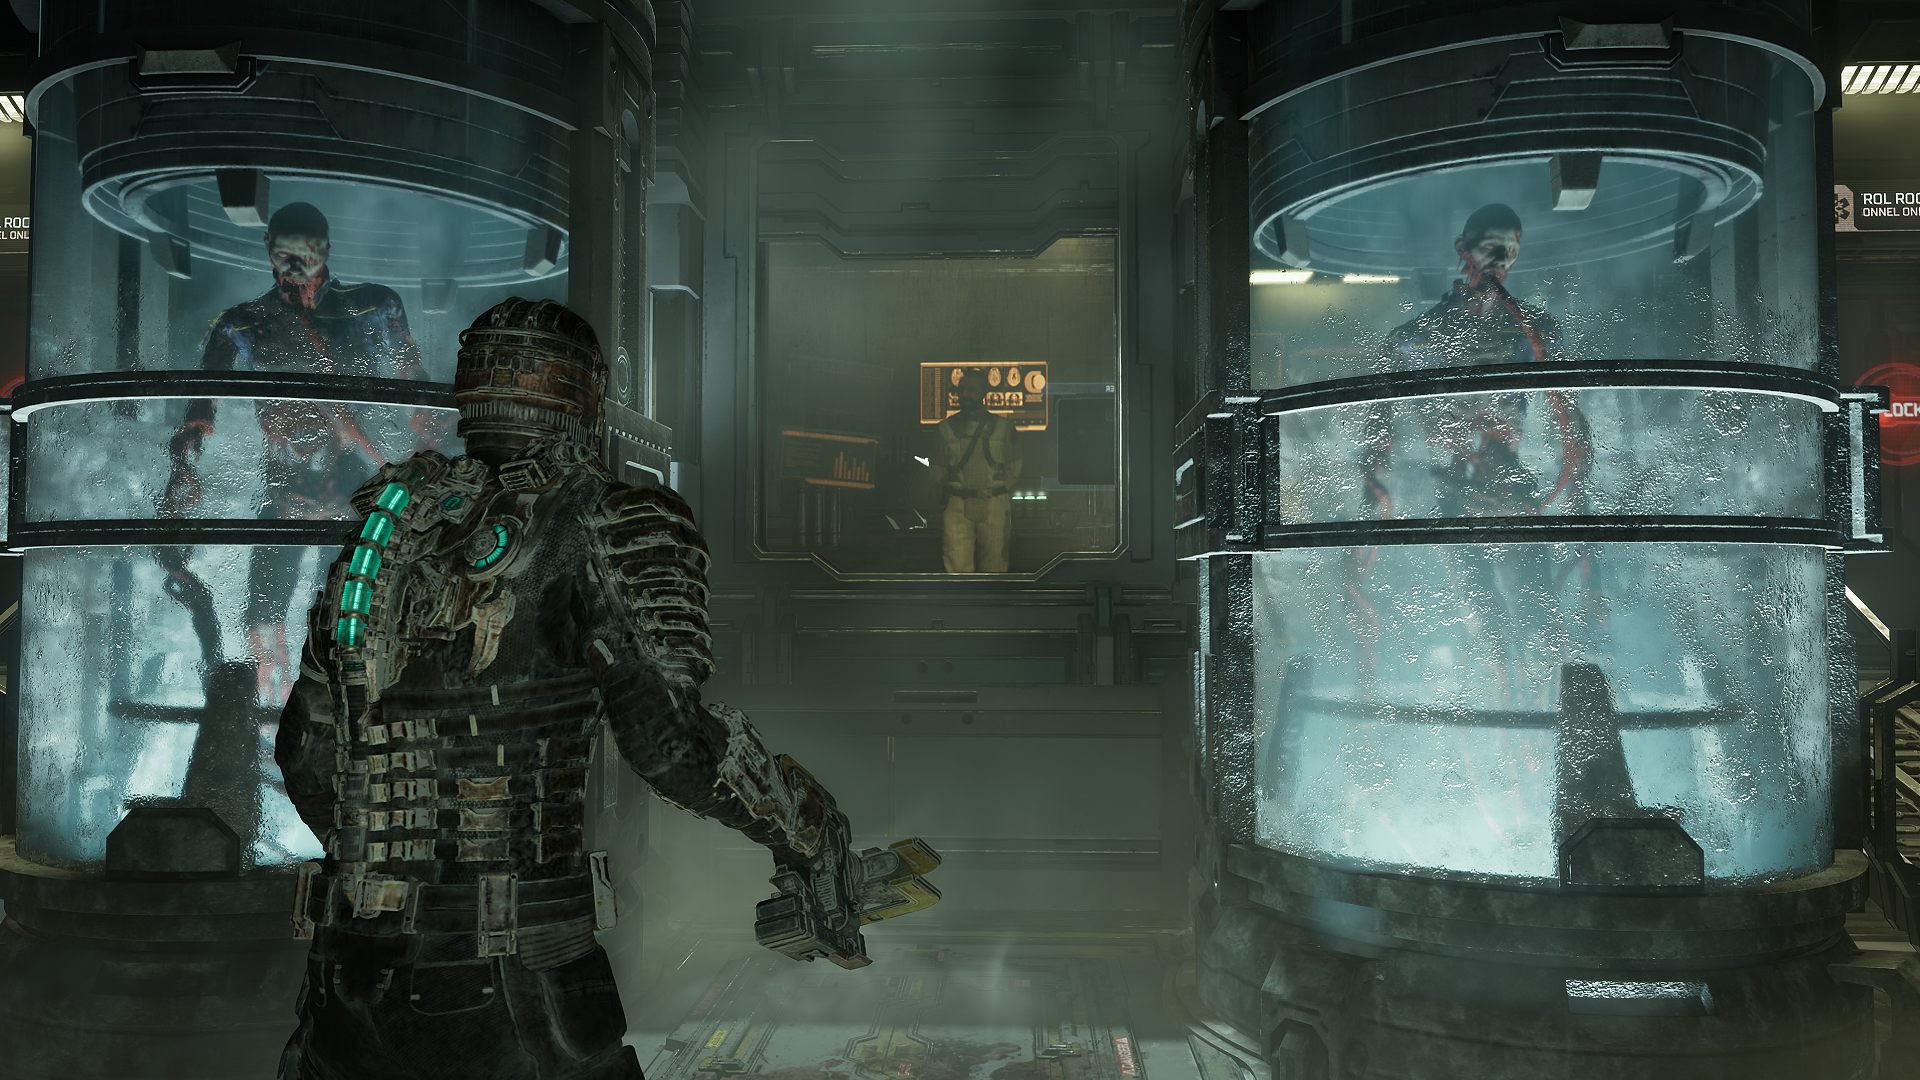 Best setting for Dead Space Remake: Isaac Clarke standing next to two necromorphs in a container